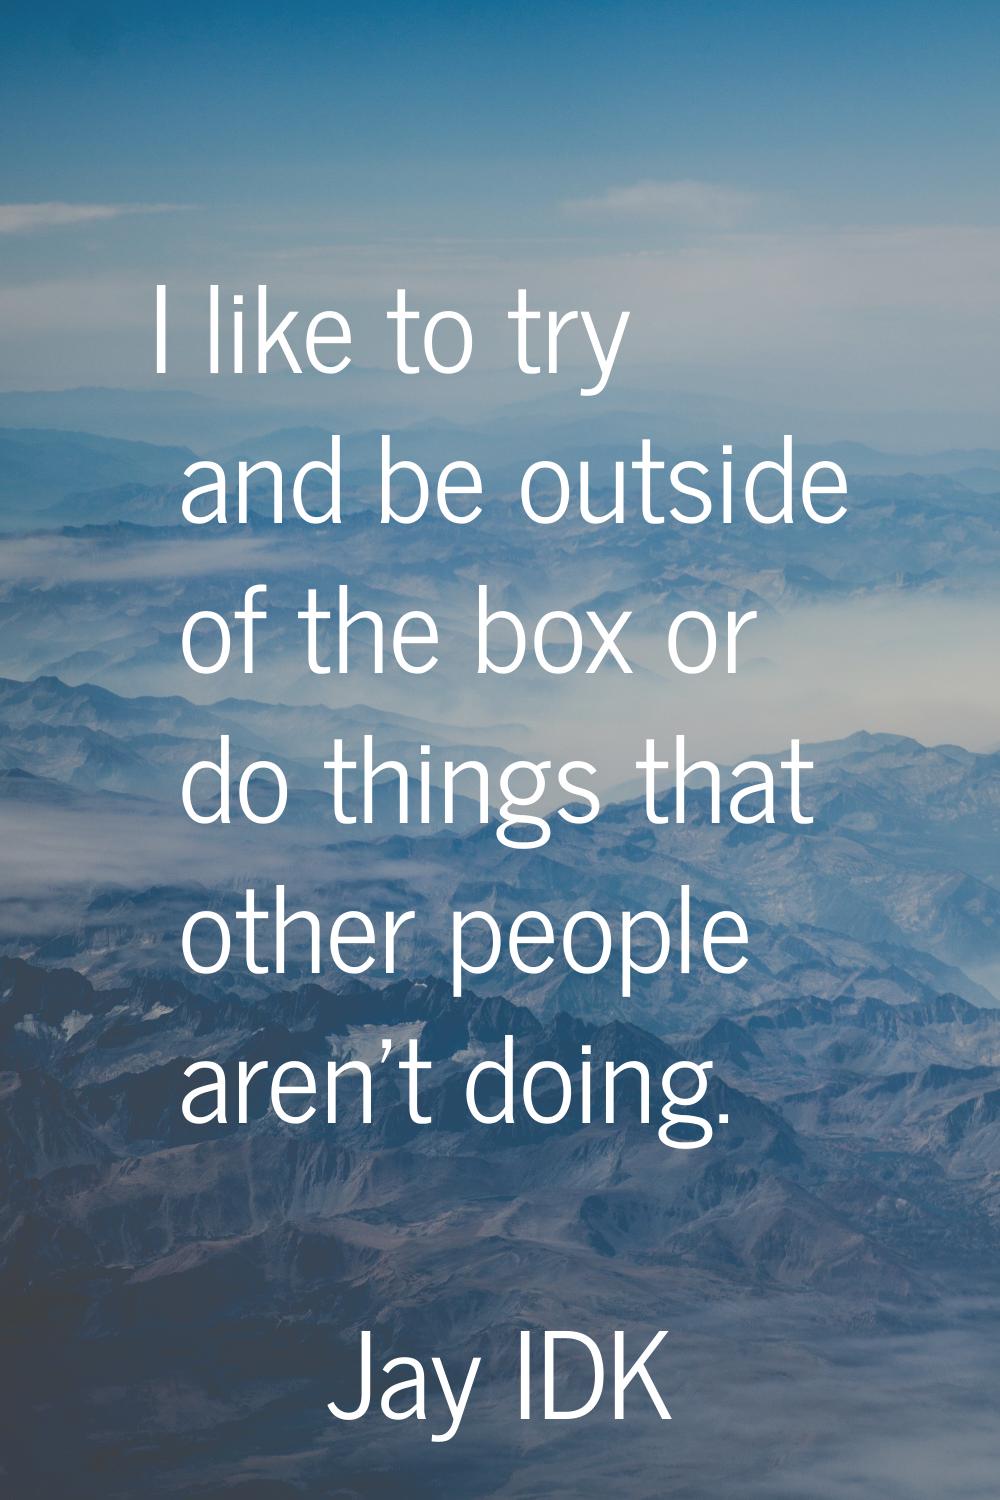 I like to try and be outside of the box or do things that other people aren't doing.